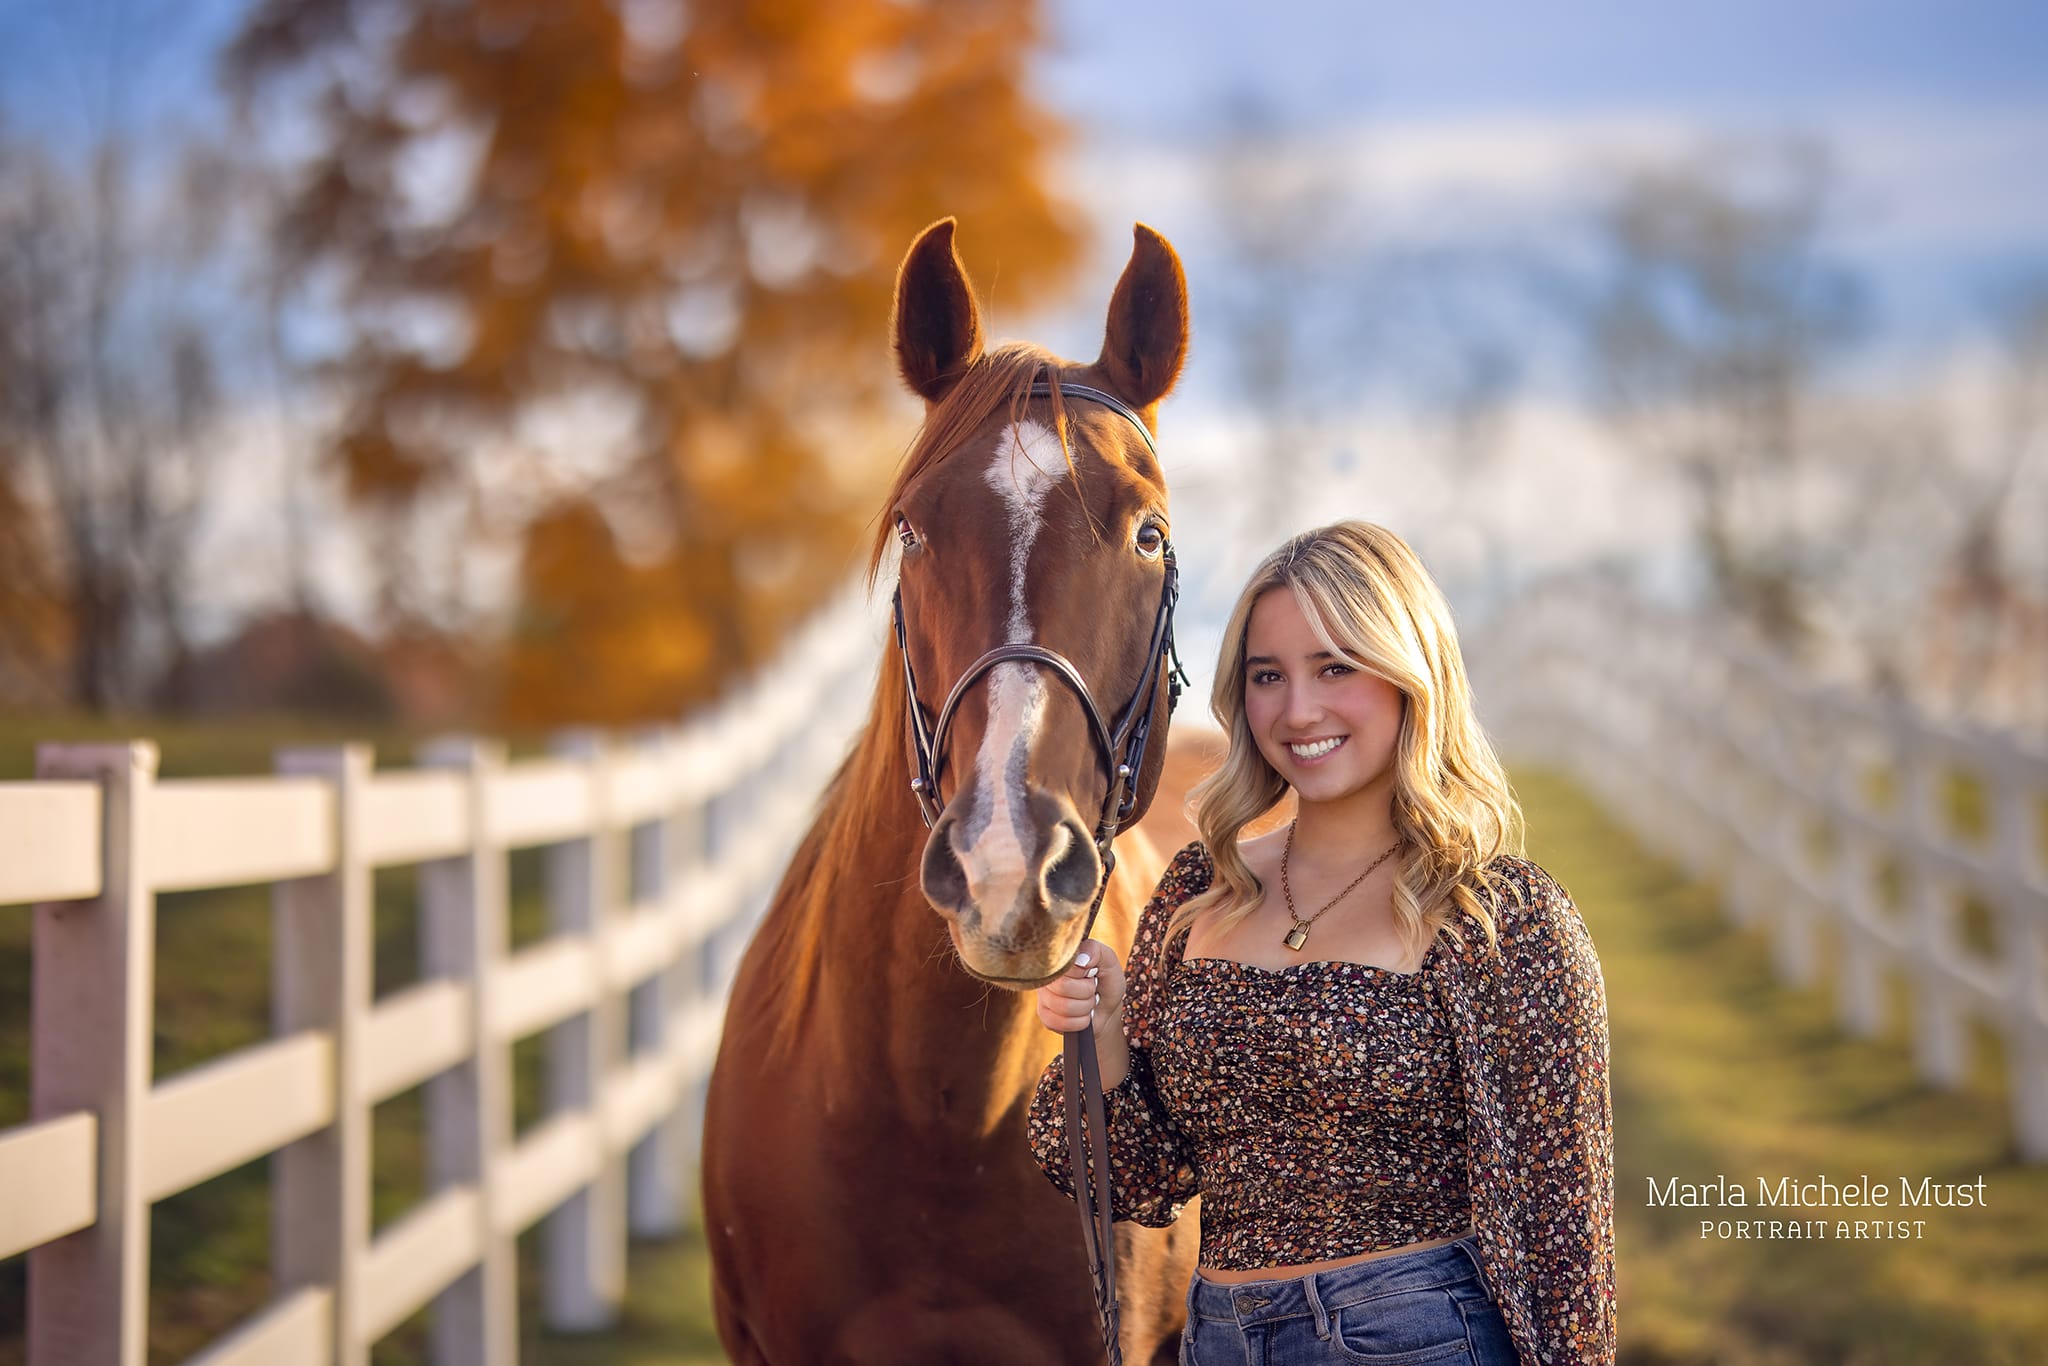 Detroit equine photographer's captivating shot: Woman standing by horse during autumn, beside a fence.